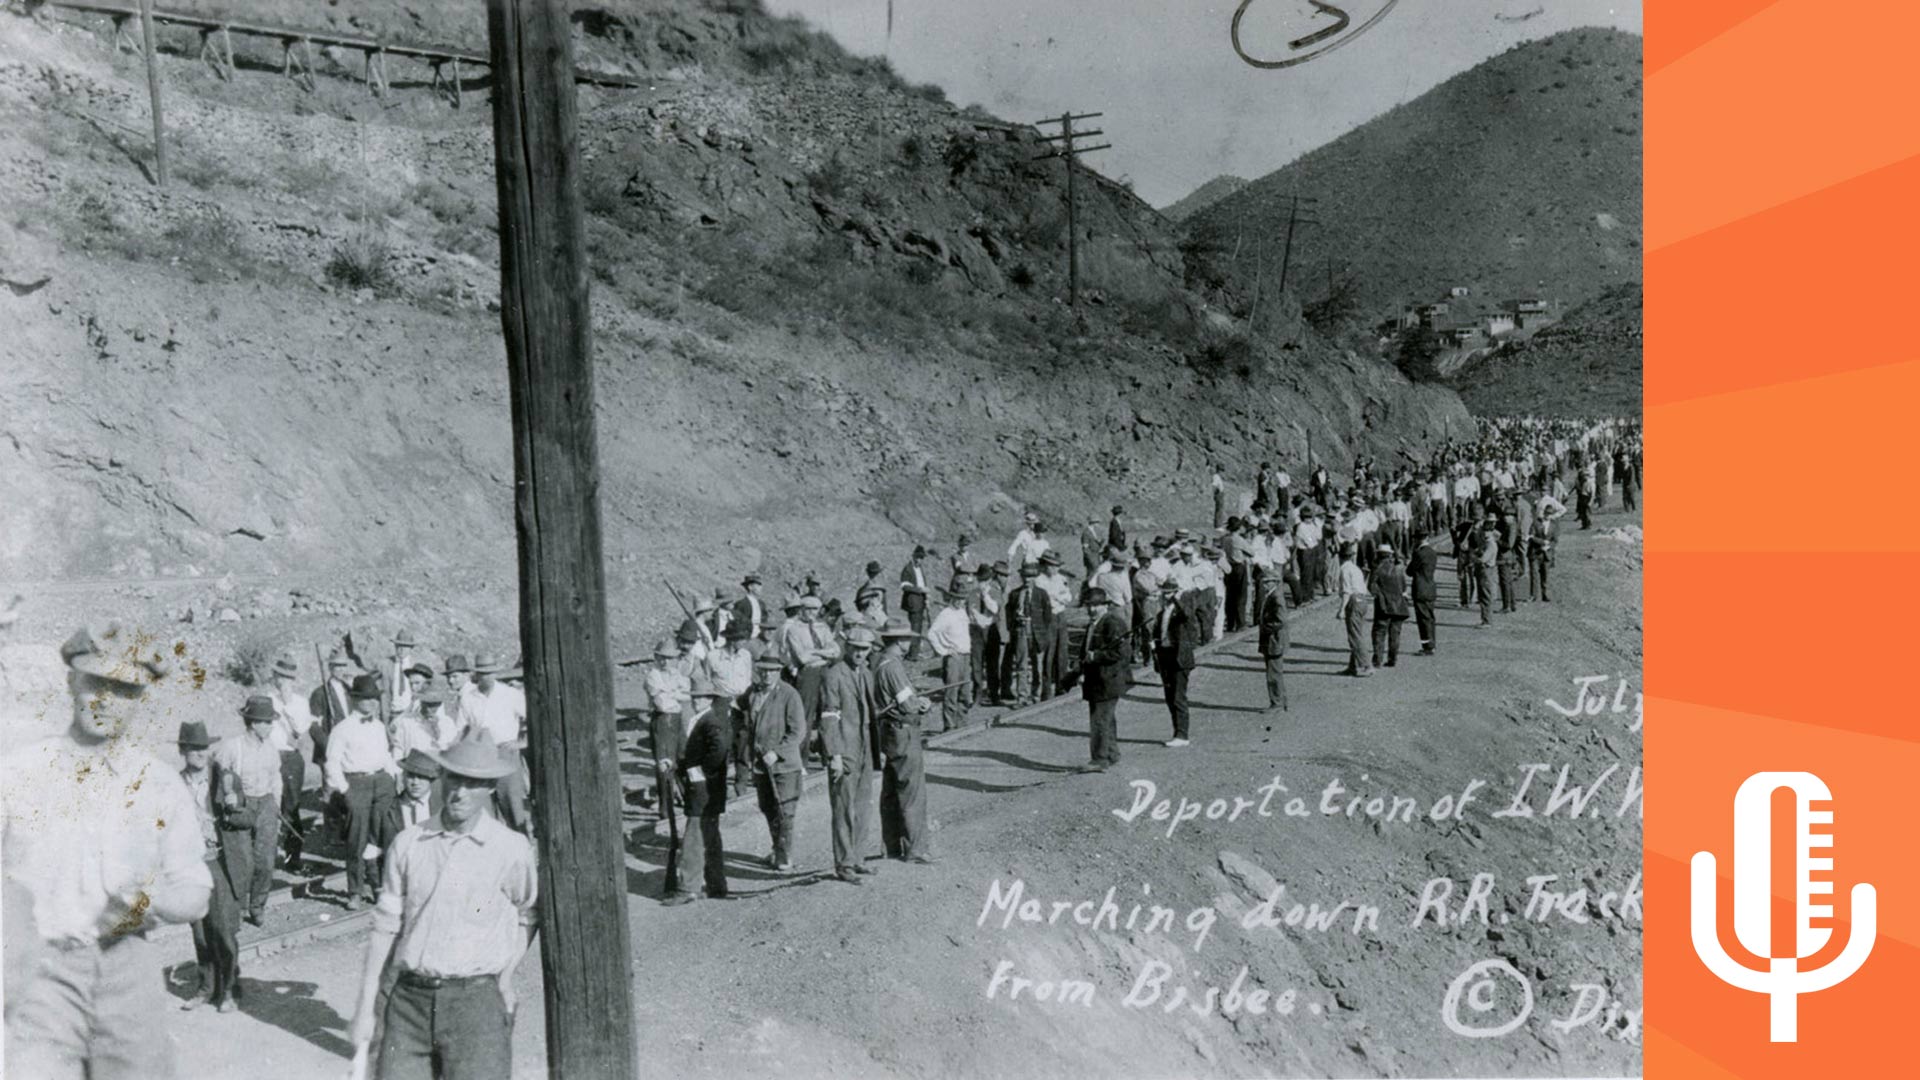 Deportation of I.W.W. Strikers from Bisbee, Arizona. From the Los Mineros Photograph Collection. 